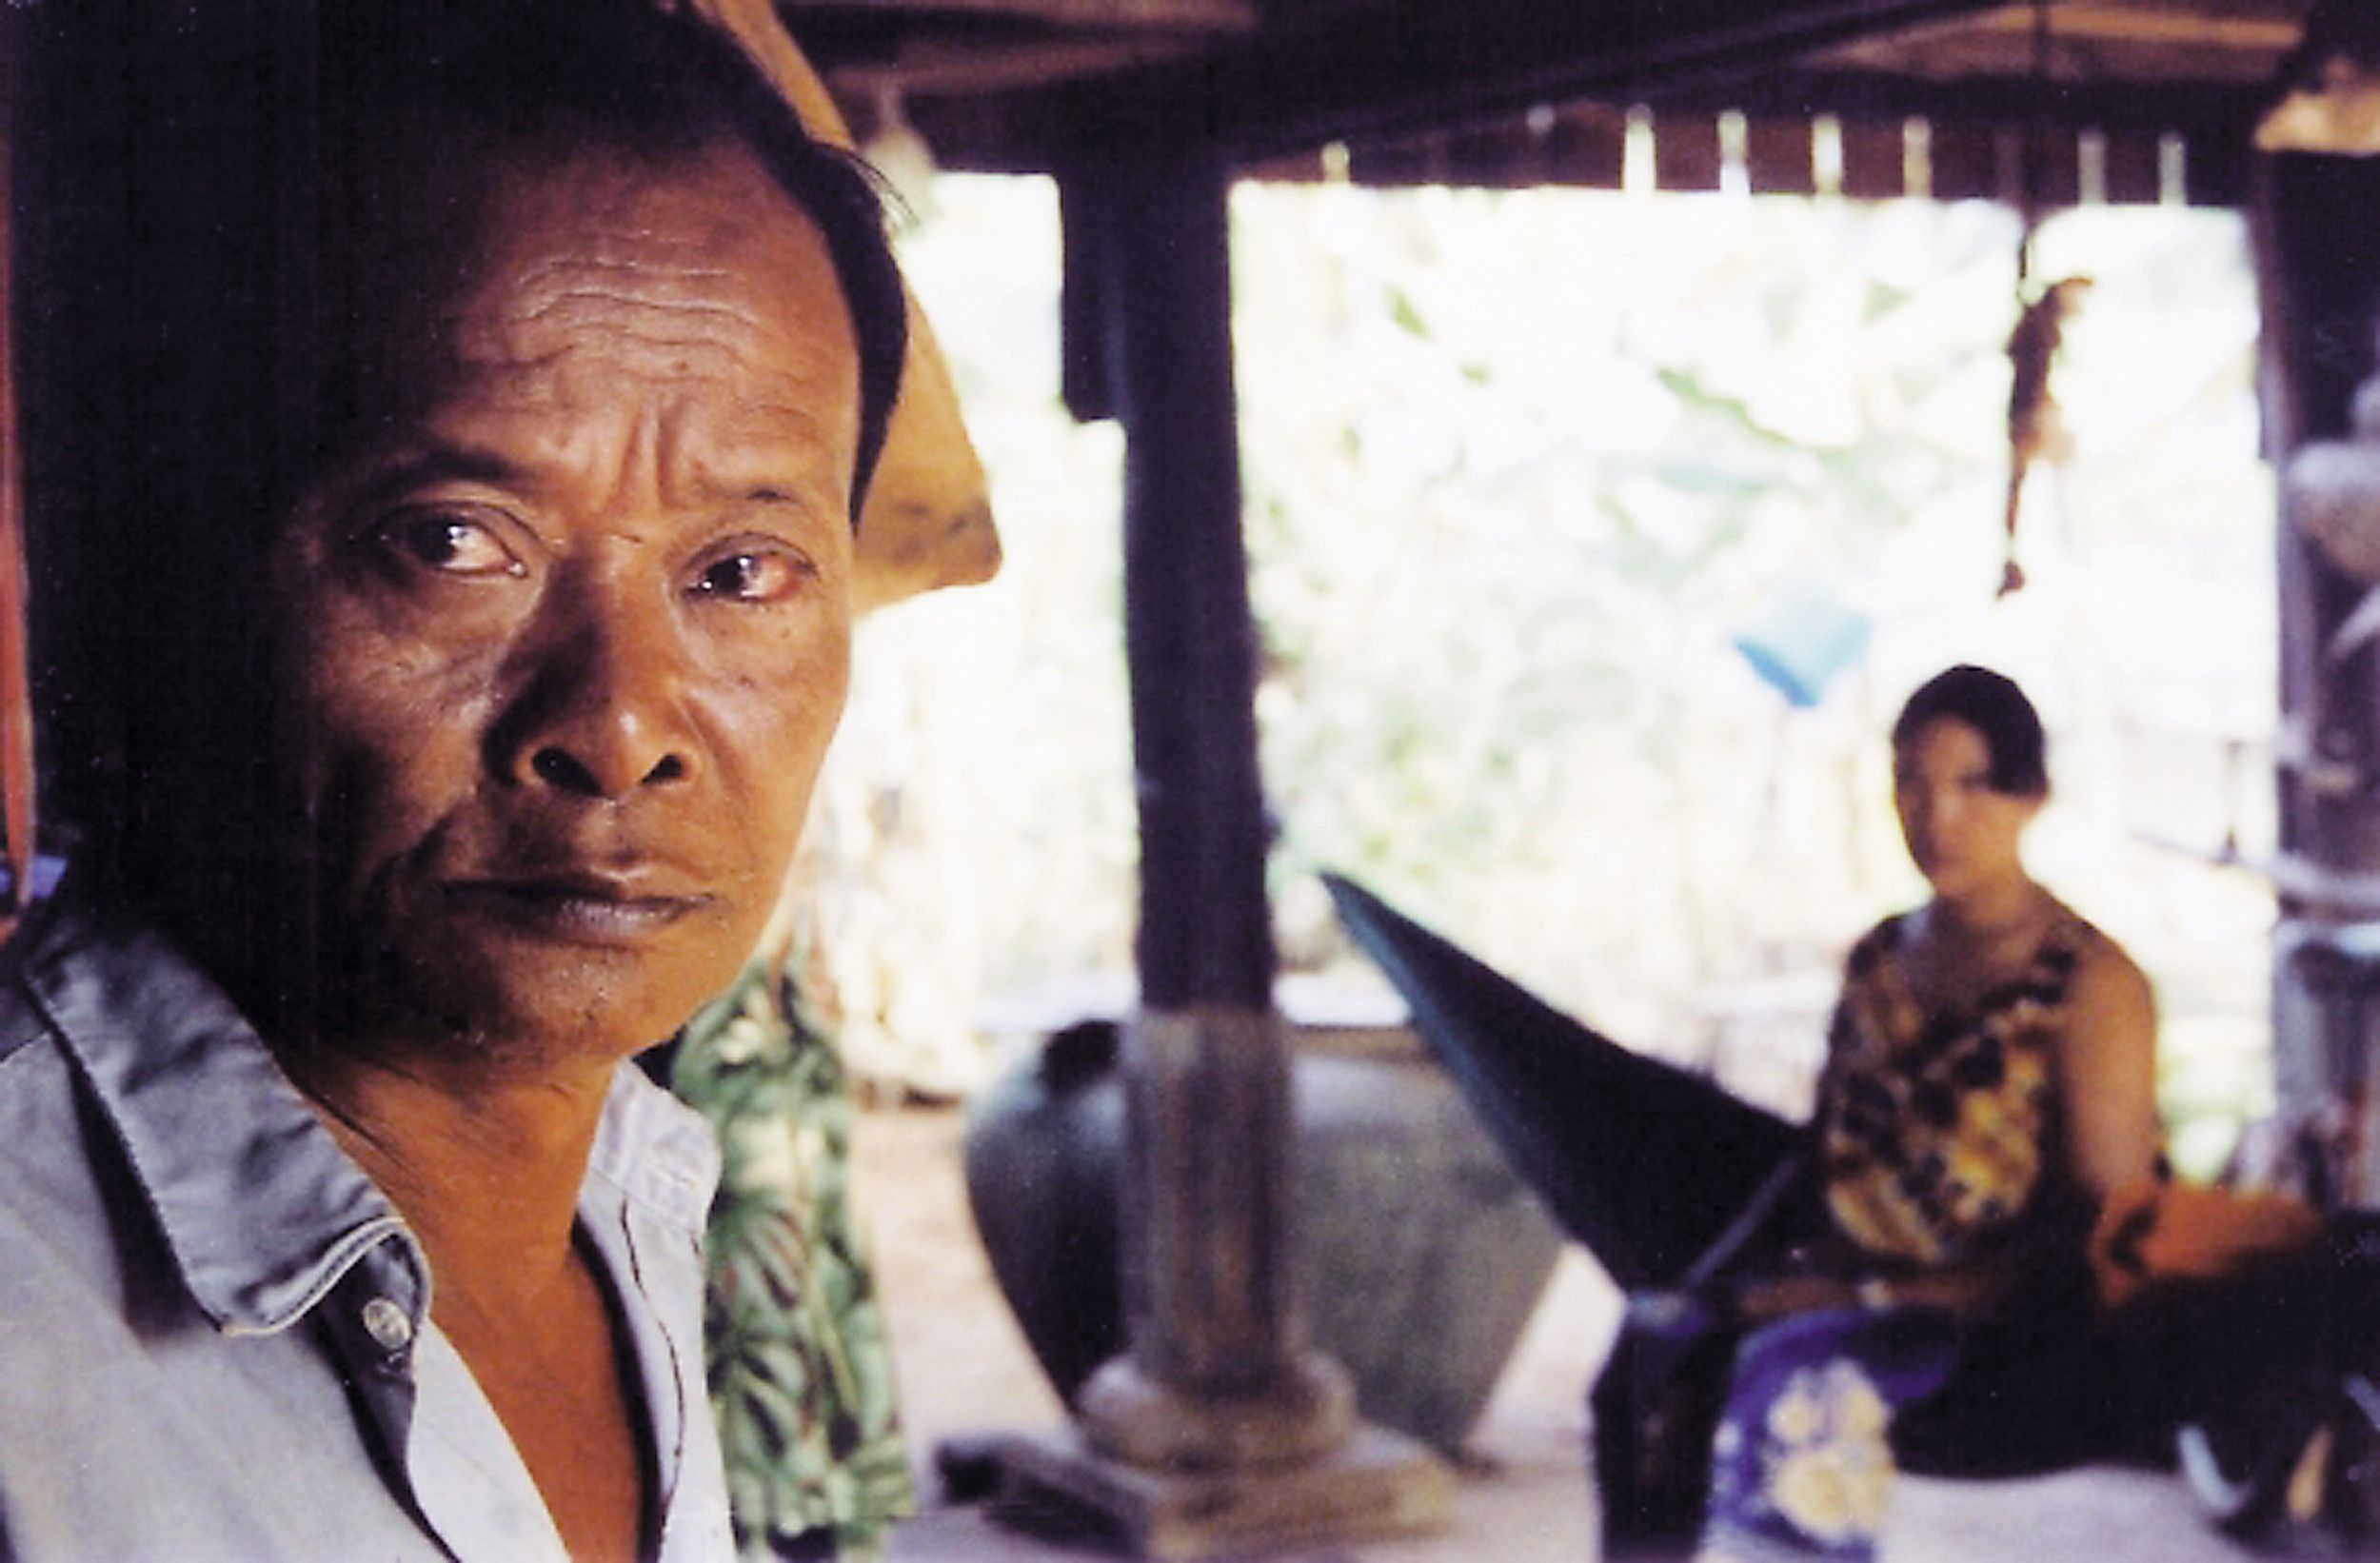 Deacon of Death - Looking for Justice in Today's Cambodia